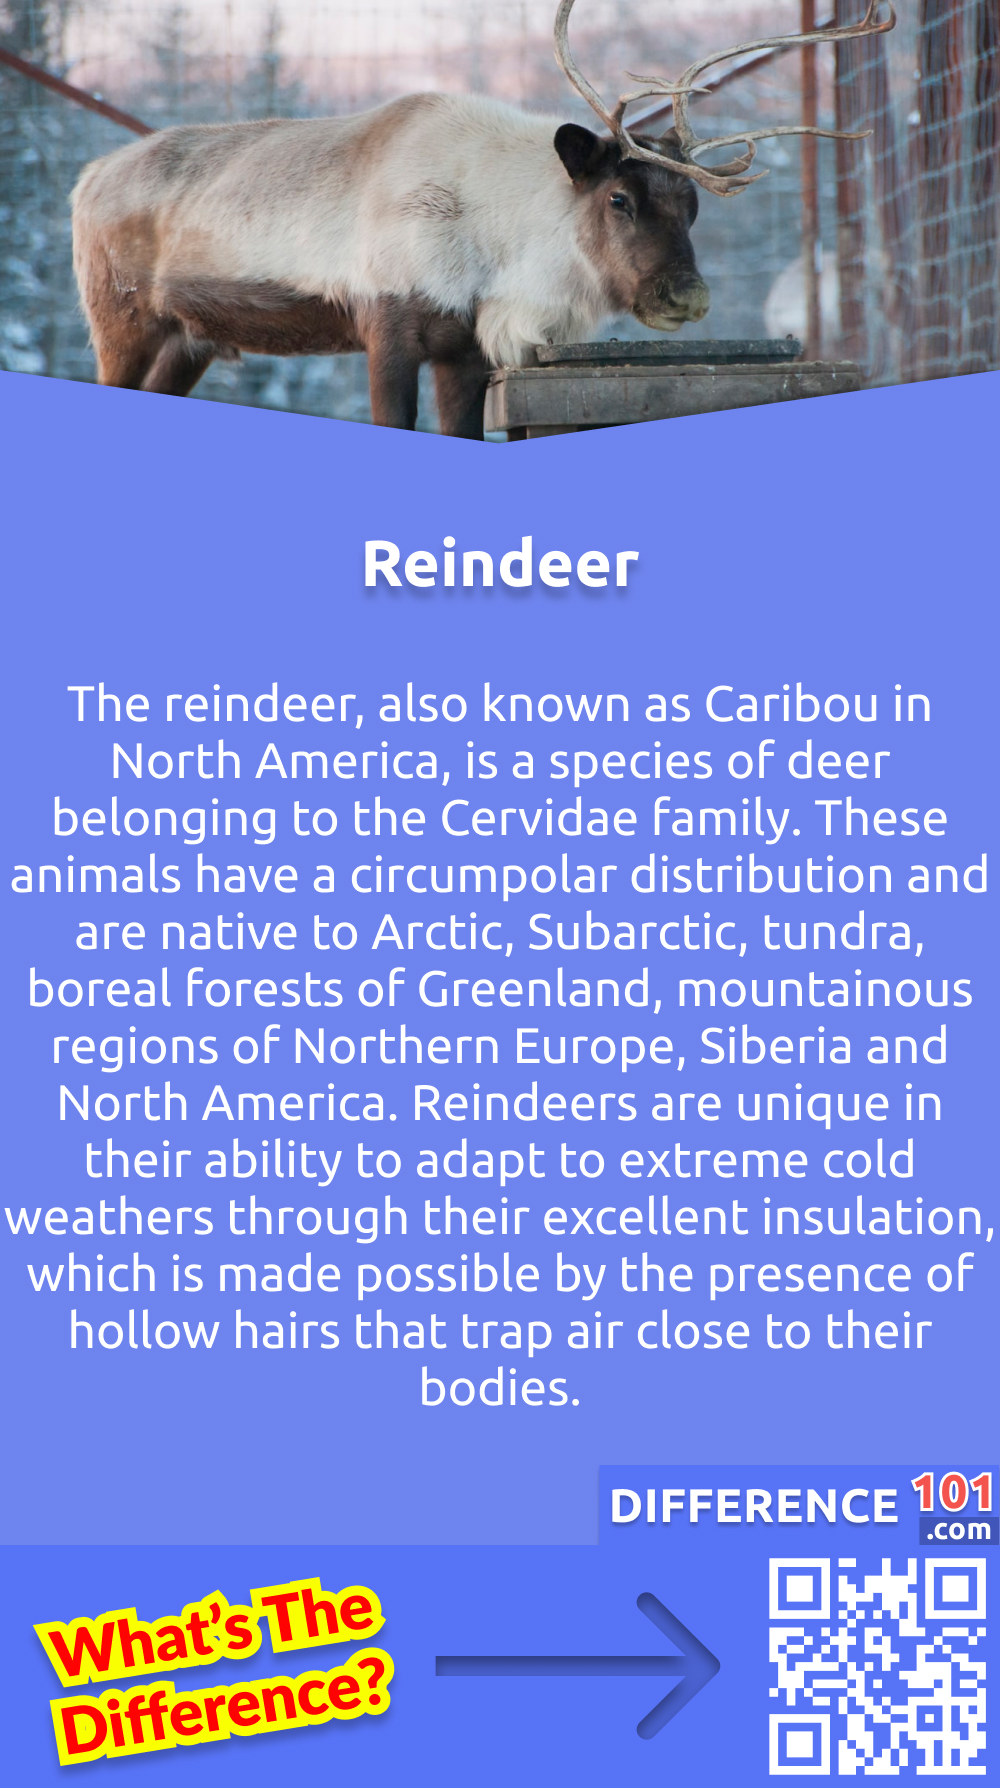 What Is Reindeer? The reindeer, also known as Caribou in North America, is a species of deer belonging to the Cervidae family. These animals have a circumpolar distribution and are native to Arctic, Subarctic, tundra, boreal forests of Greenland, mountainous regions of Northern Europe, Siberia and North America. Reindeers are unique in their ability to adapt to extreme cold weathers through their excellent insulation, which is made possible by the presence of hollow hairs that trap air close to their bodies. They are also known for their remarkable endurance, speed, and strength, which make them a vital resource for many nomadic tribes in the Arctic regions. The importance of these animals cannot be overstated, as they play a significant role in the culture and economy of the communities that rely on them.